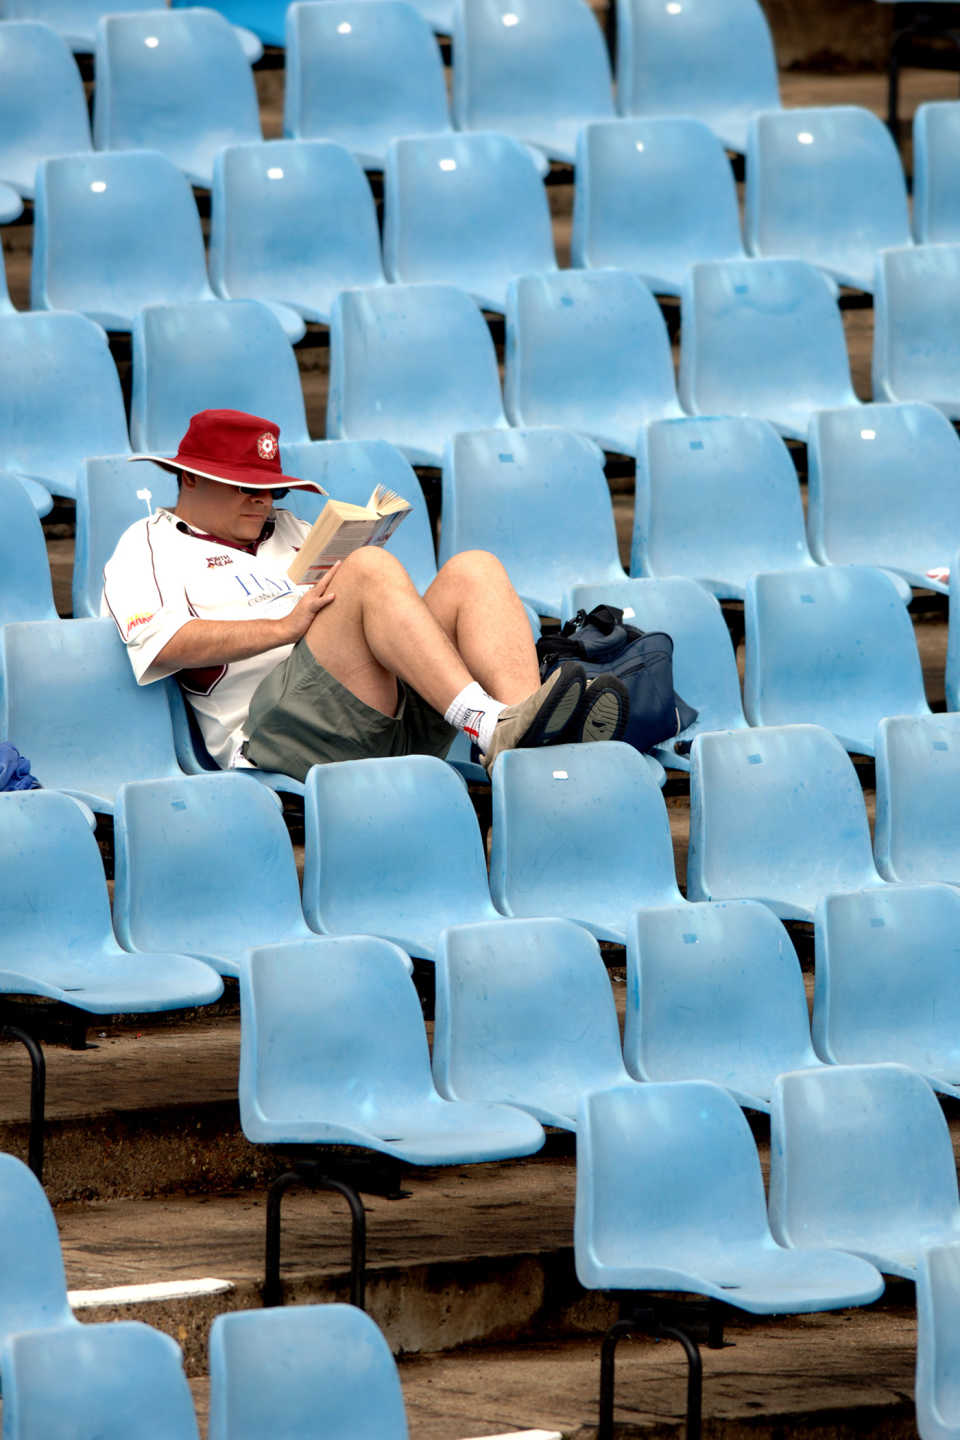 A fan reads in the stands